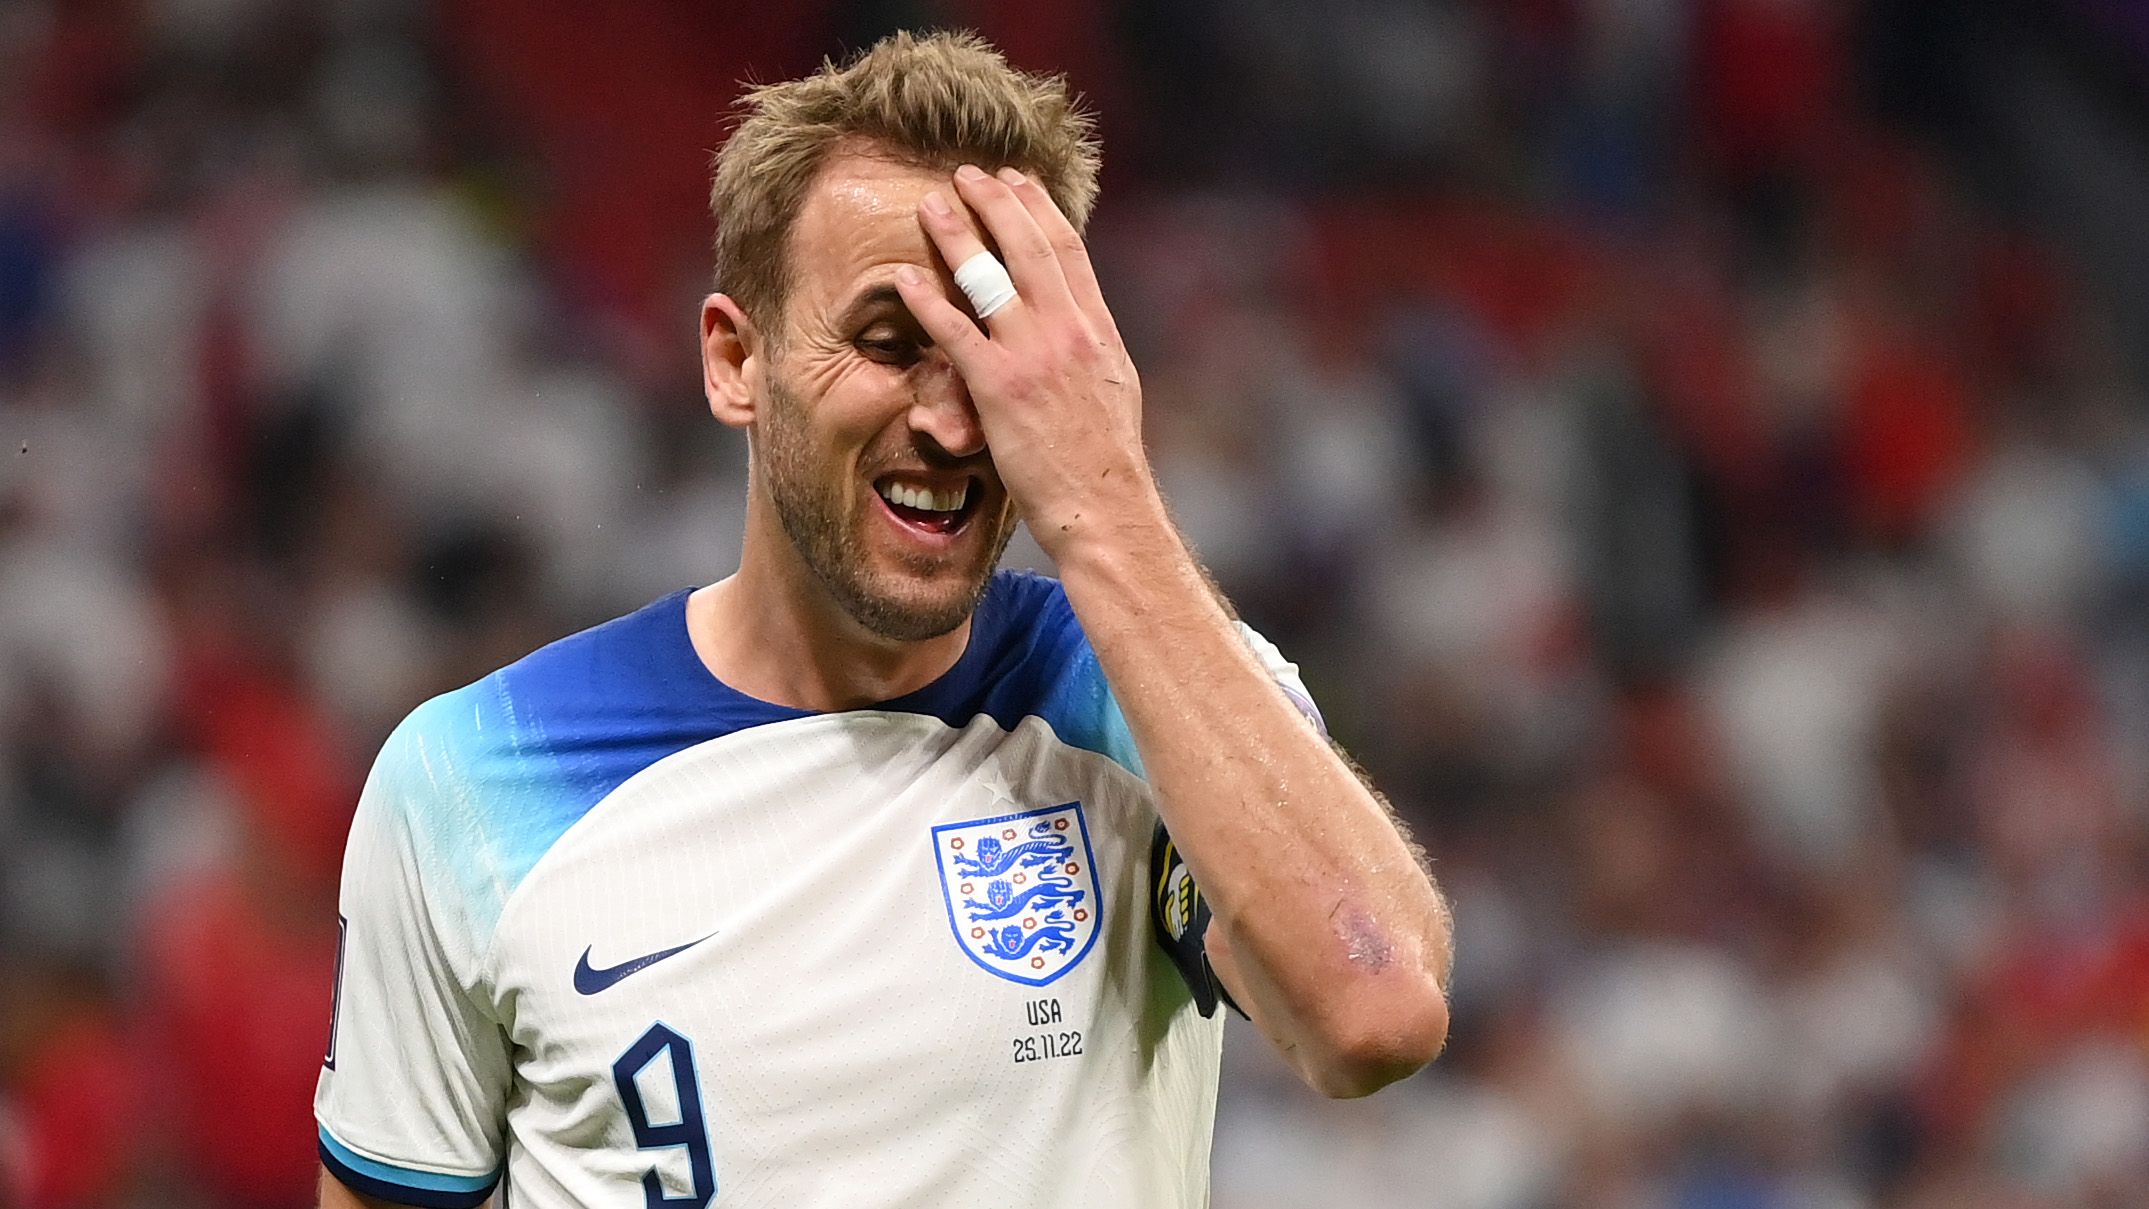 England stars shredded after 'dismal' performance in scoreless draw against the USA